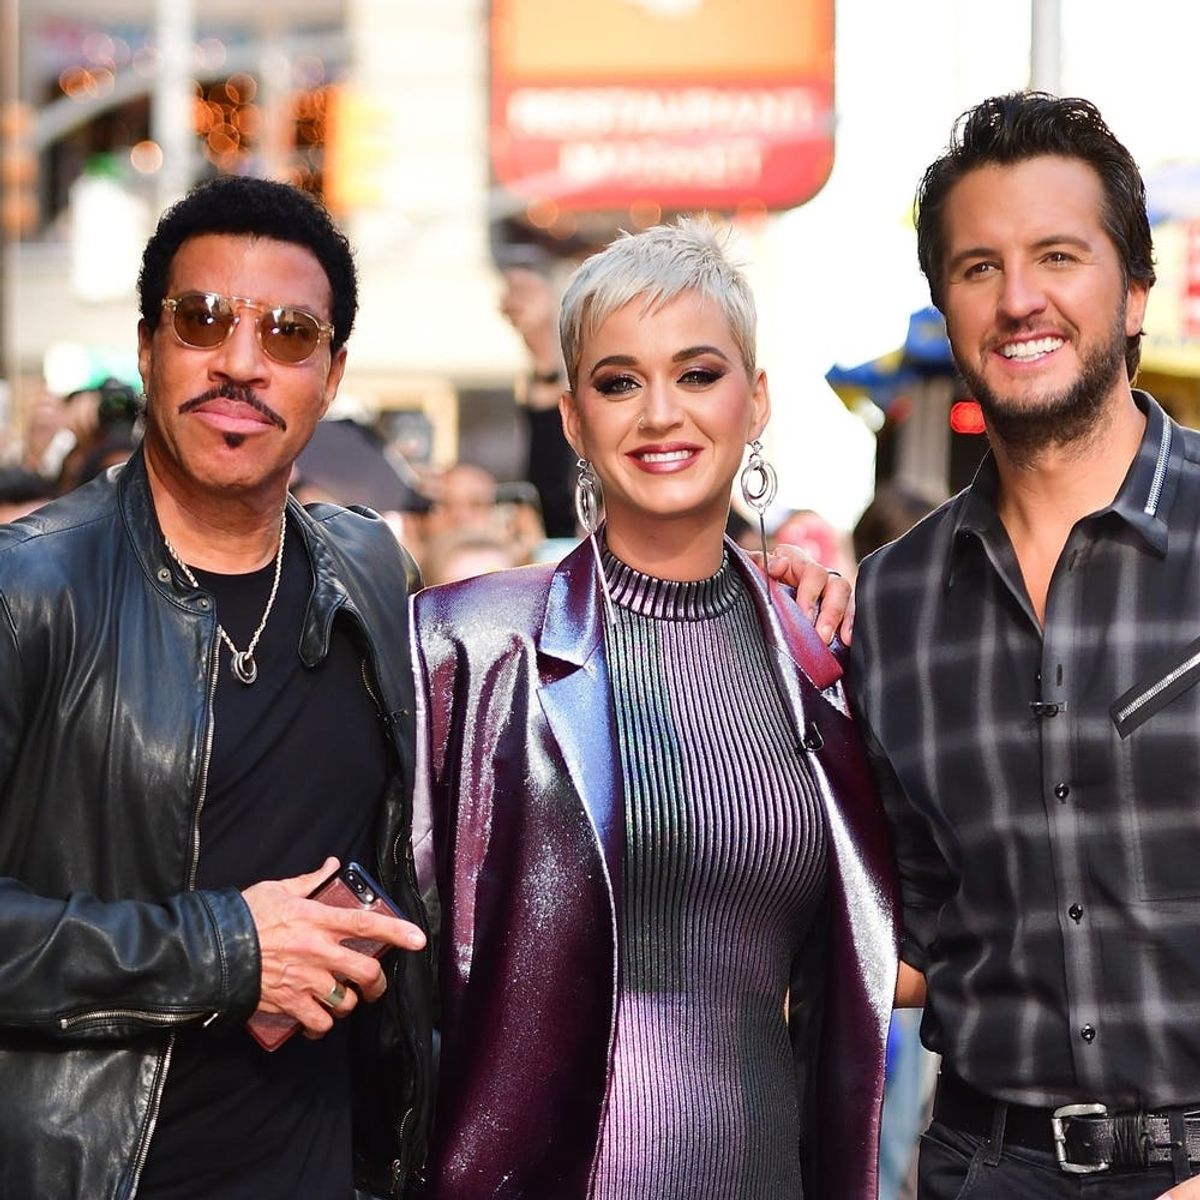 Here’s When You Can Watch Katy Perry, Luke Bryan, and Lionel Richie on “American Idol”